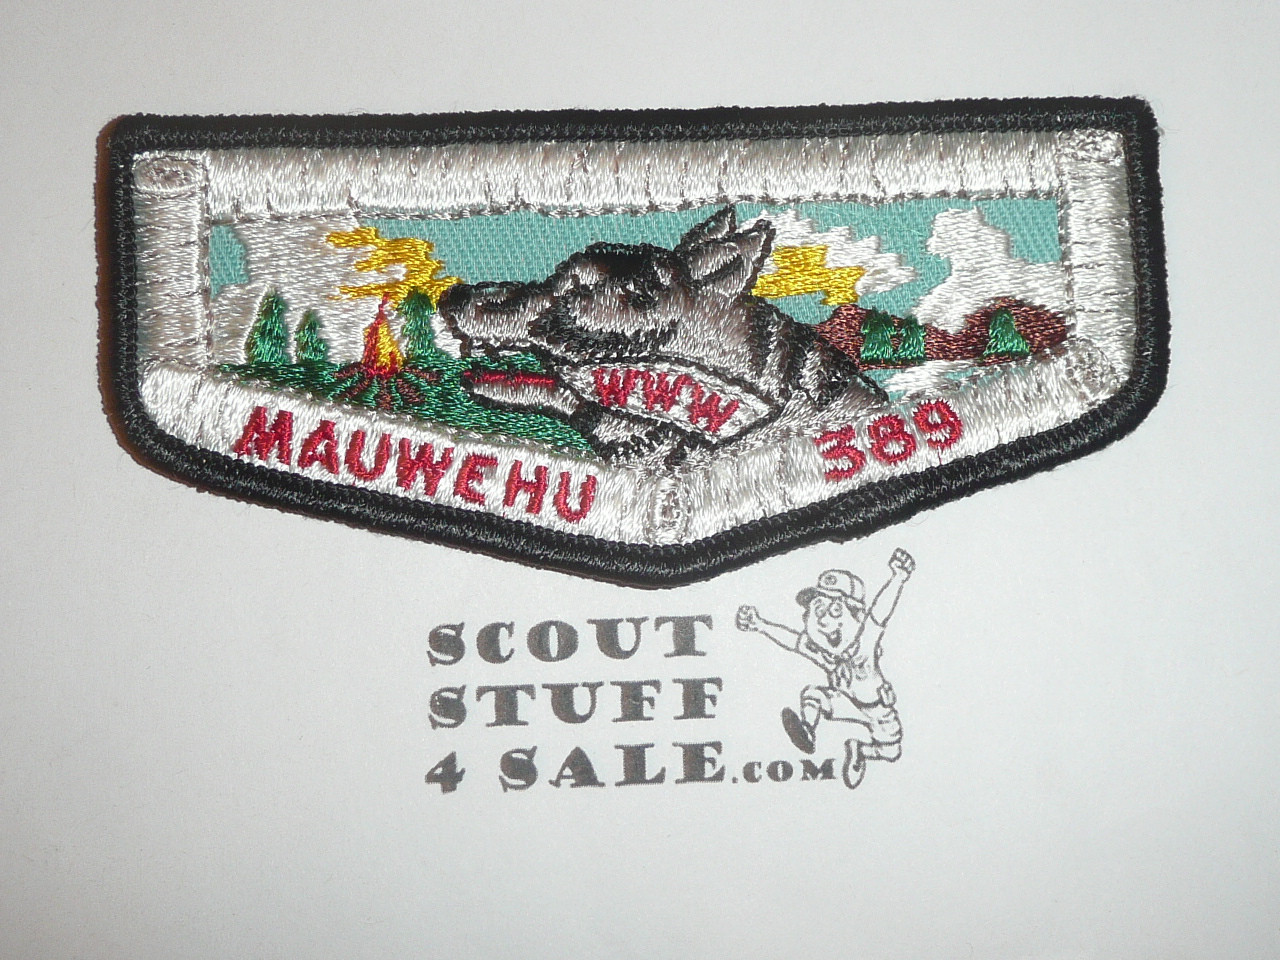 Order of the Arrow Lodge #389 Mauwehu f3 Flap Patch